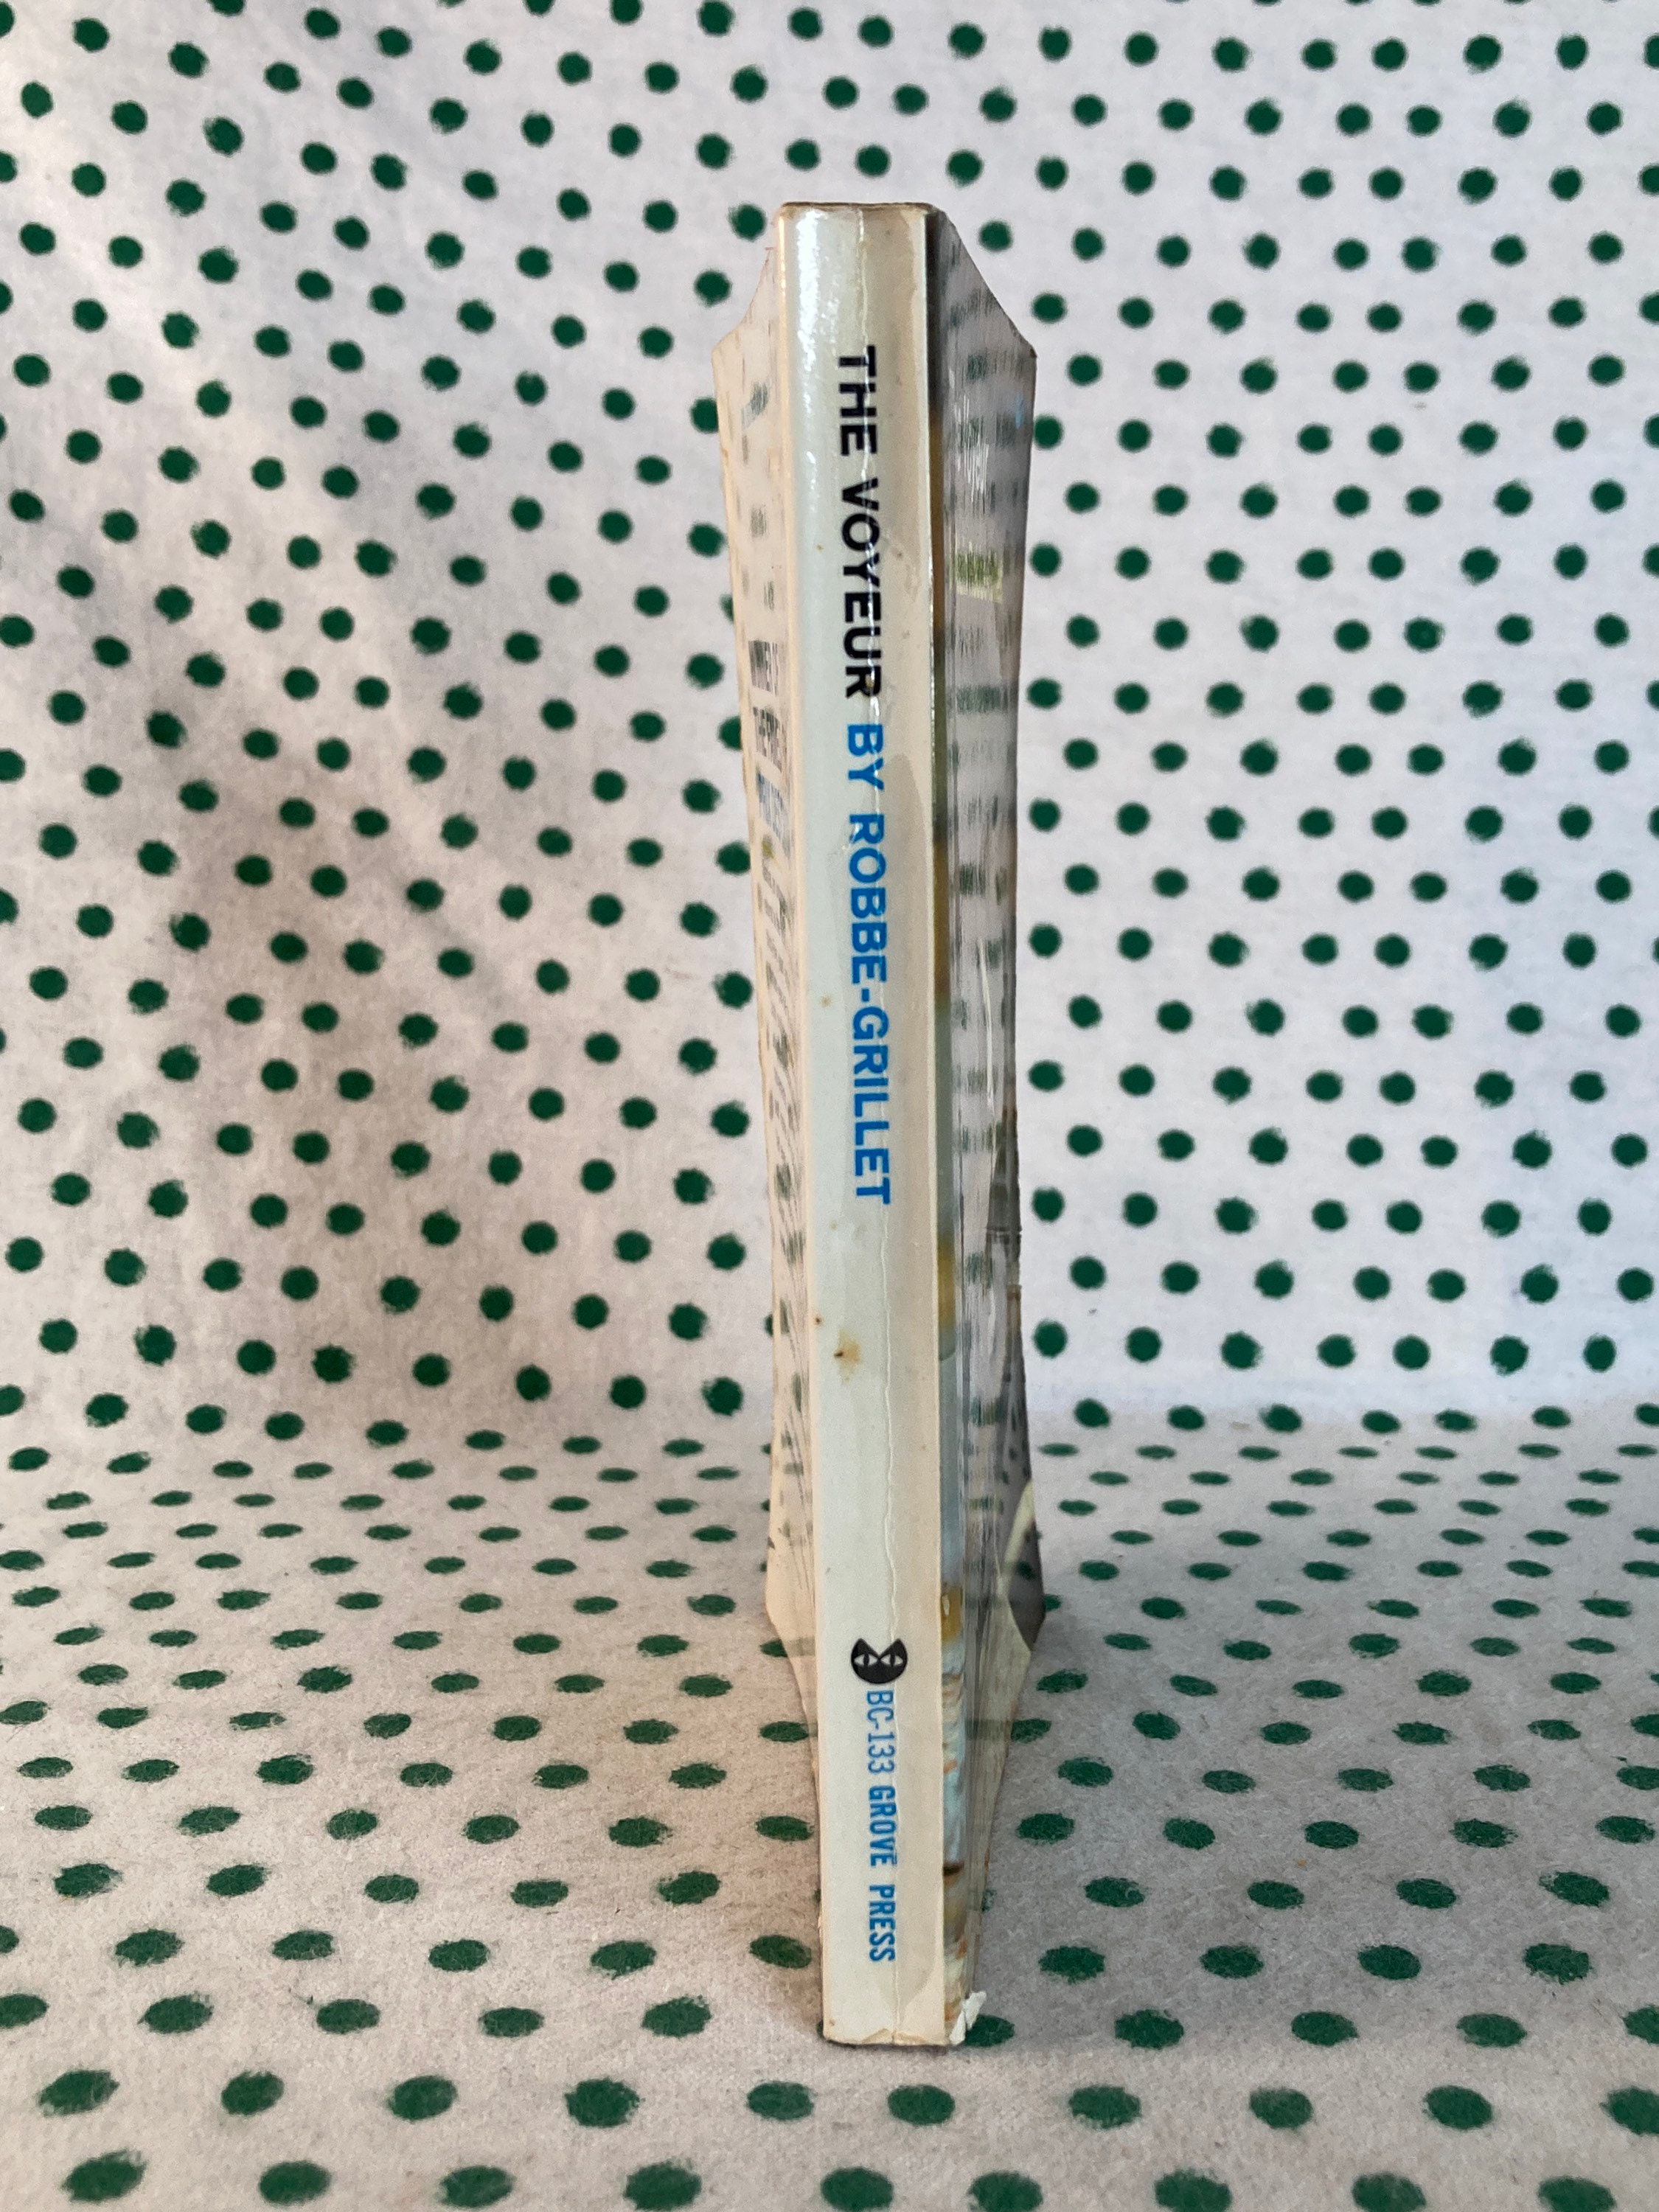 The Voyeur by Alain Robbe-grillet Vintage Grove Paperback Xxx Pic Hd